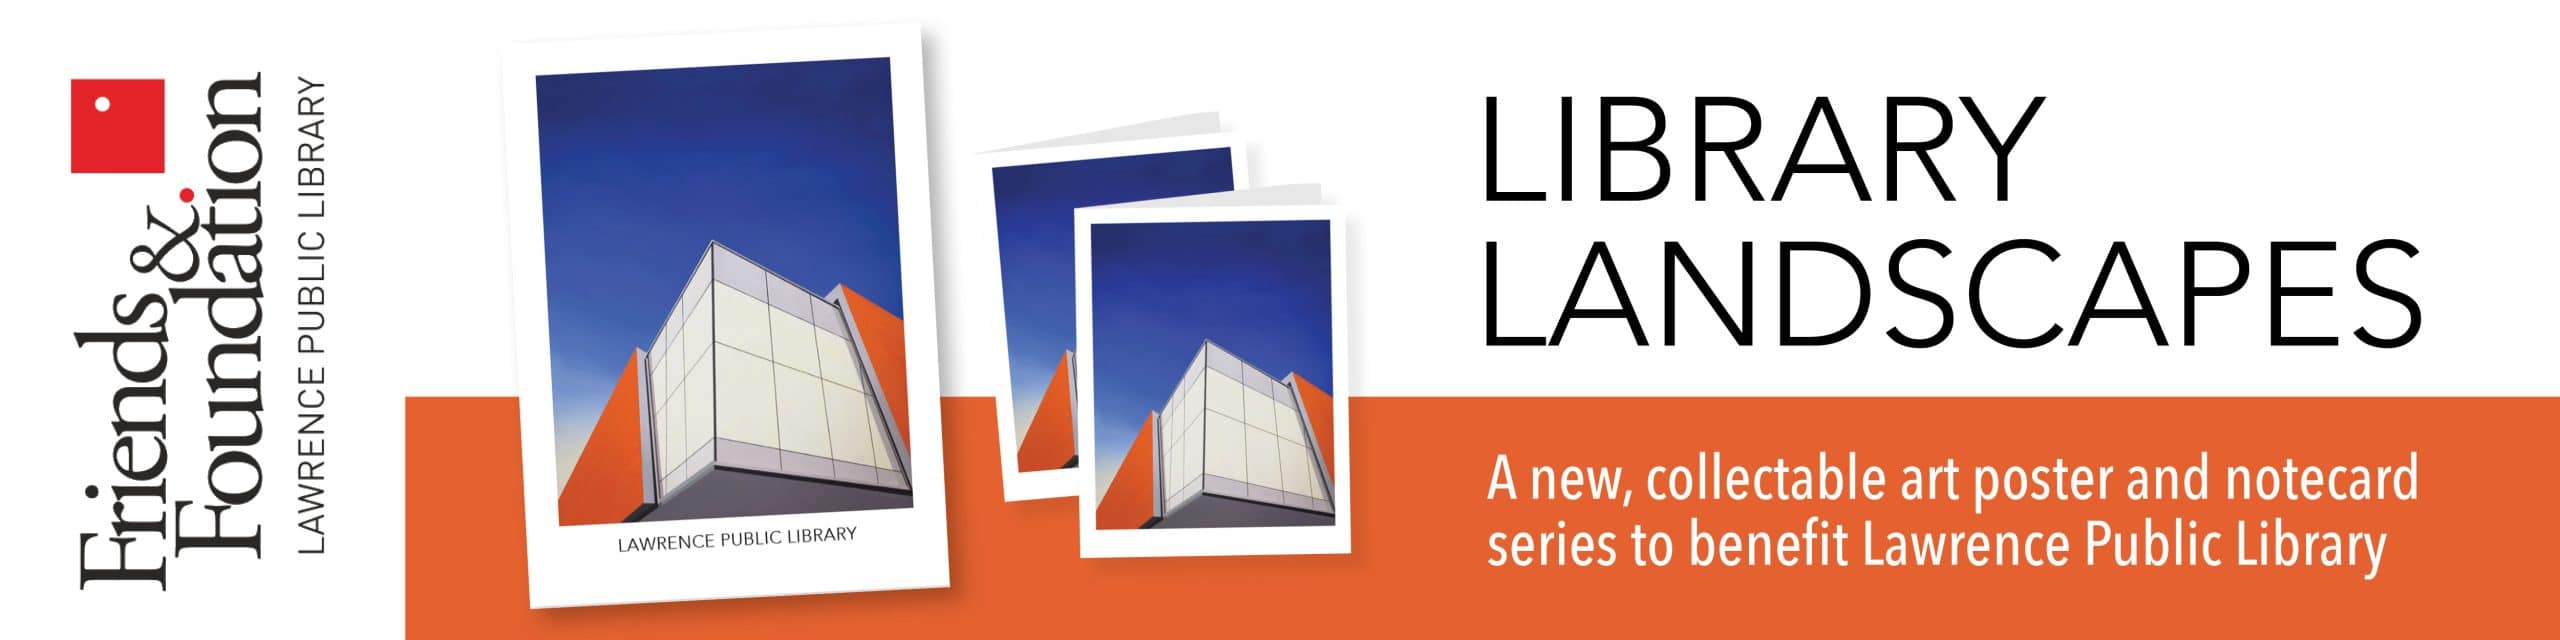 Library Landscapes — A new, collectible art poster and notecard series to benefit Lawrence Public Library